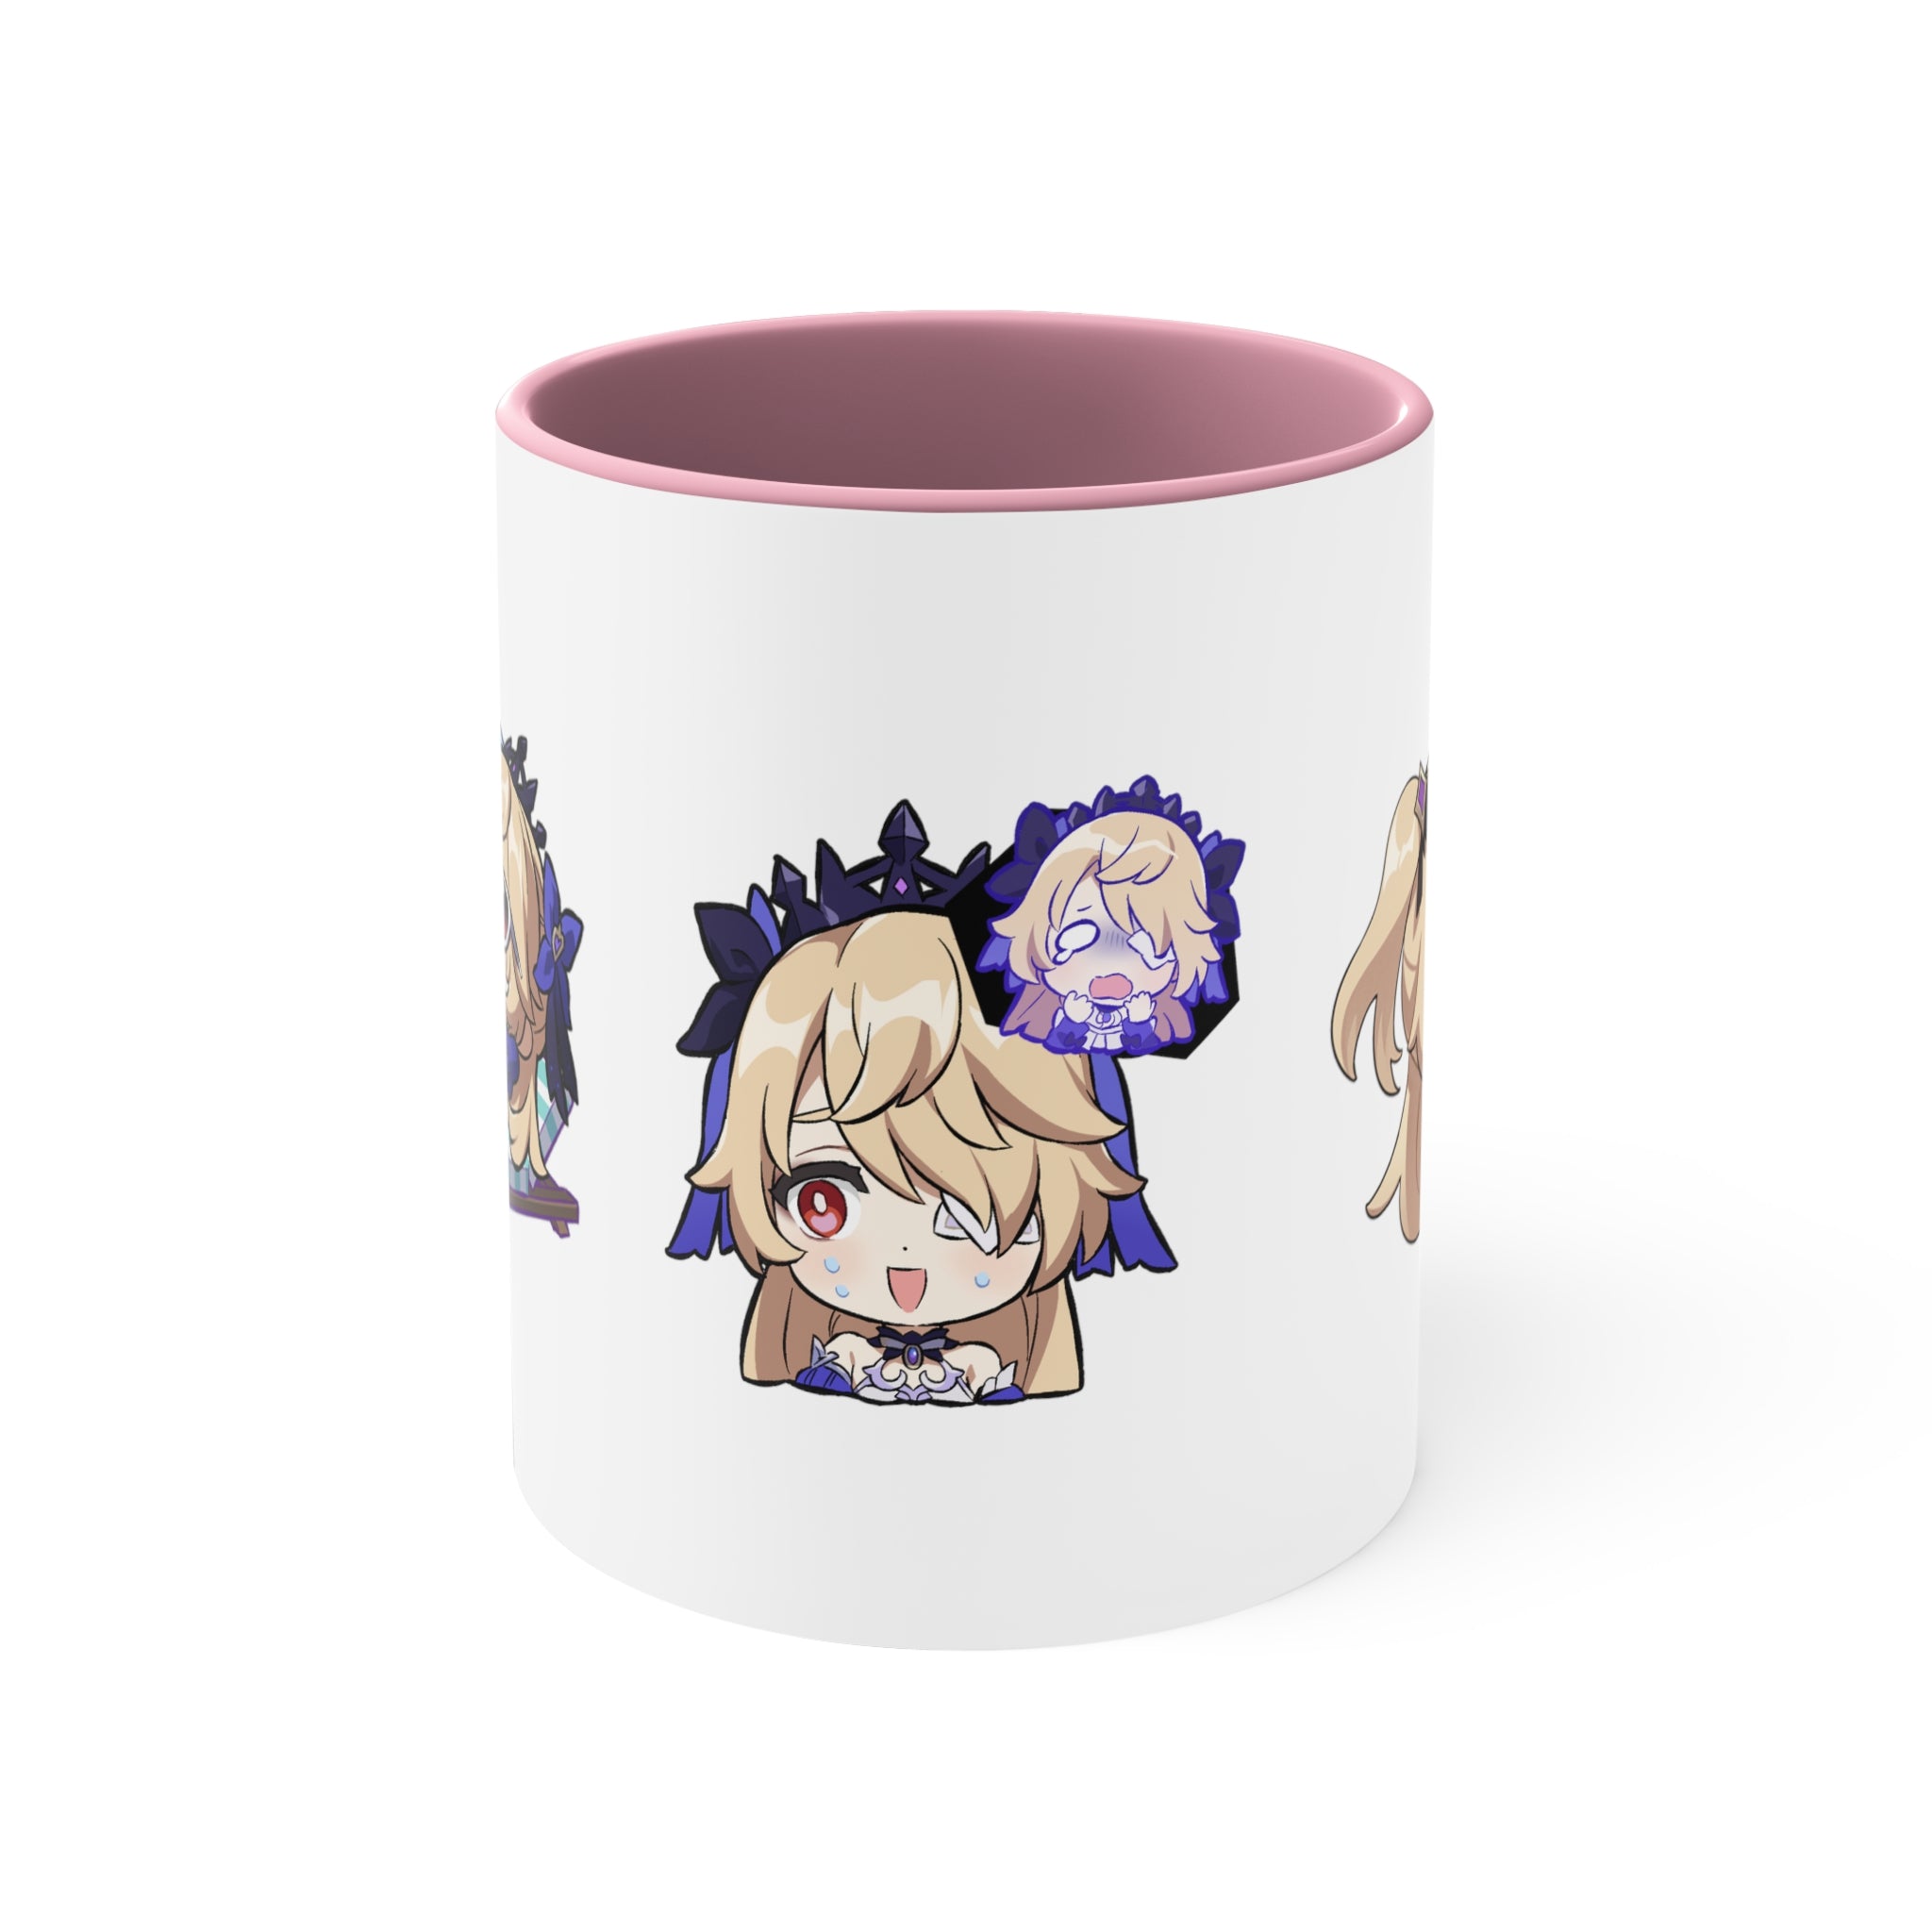 Fischl Genshin Impact Accent Coffee Mug, 11oz Cups Mugs Cup Gift For Gamer Gifts Game Anime Fanart Fan Birthday Valentine's Christmas